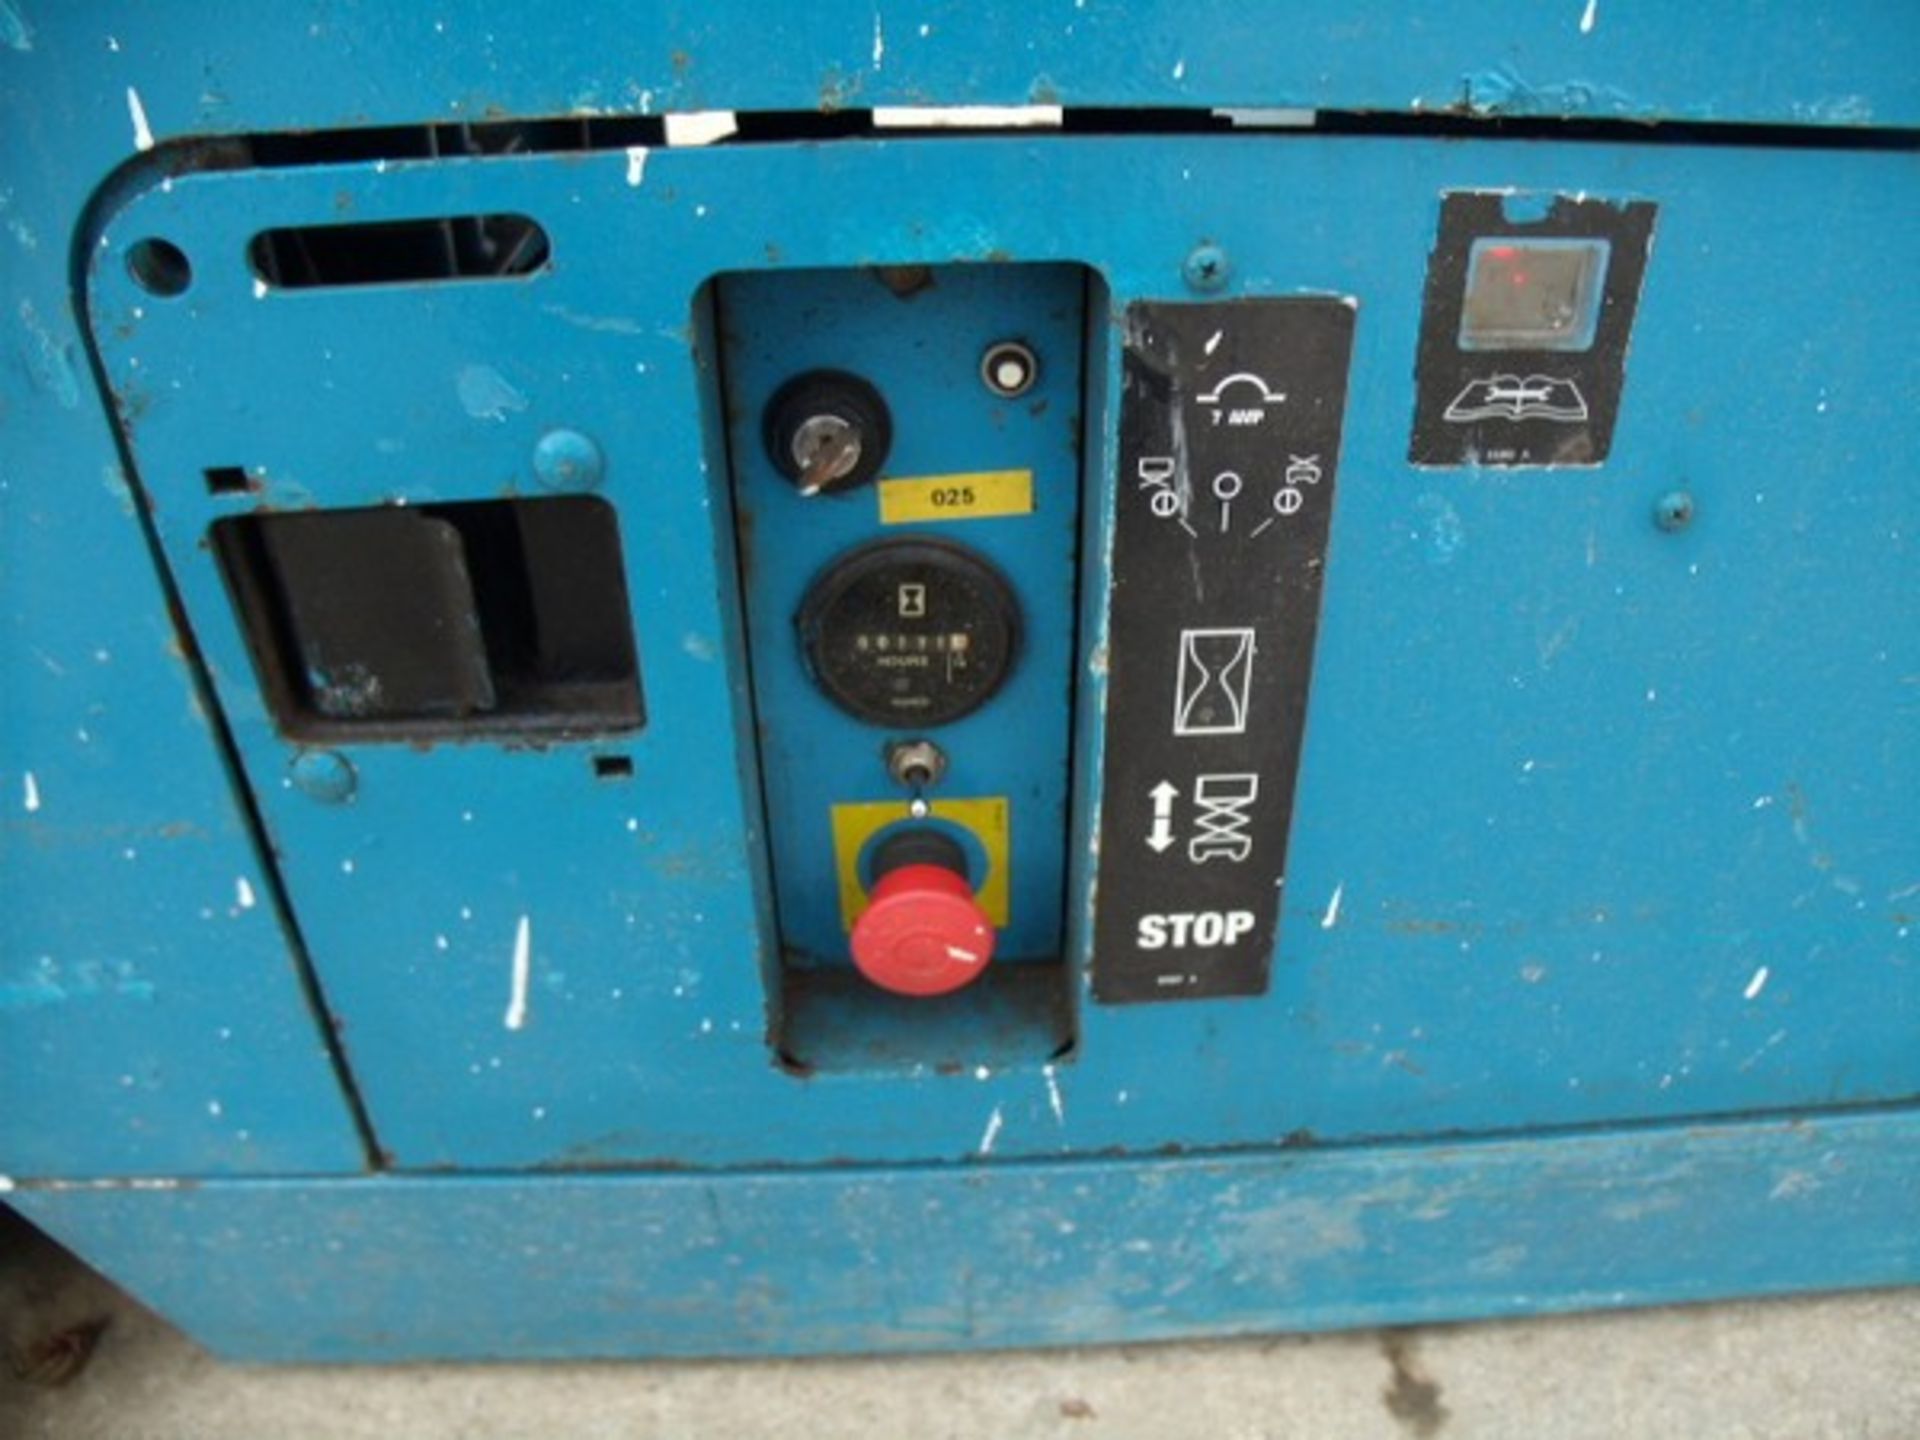 2007 GENIE 2632, s/n - GS3207/86954, 171hrs (verifed), new battery fitted Aug 2017. - Image 5 of 9